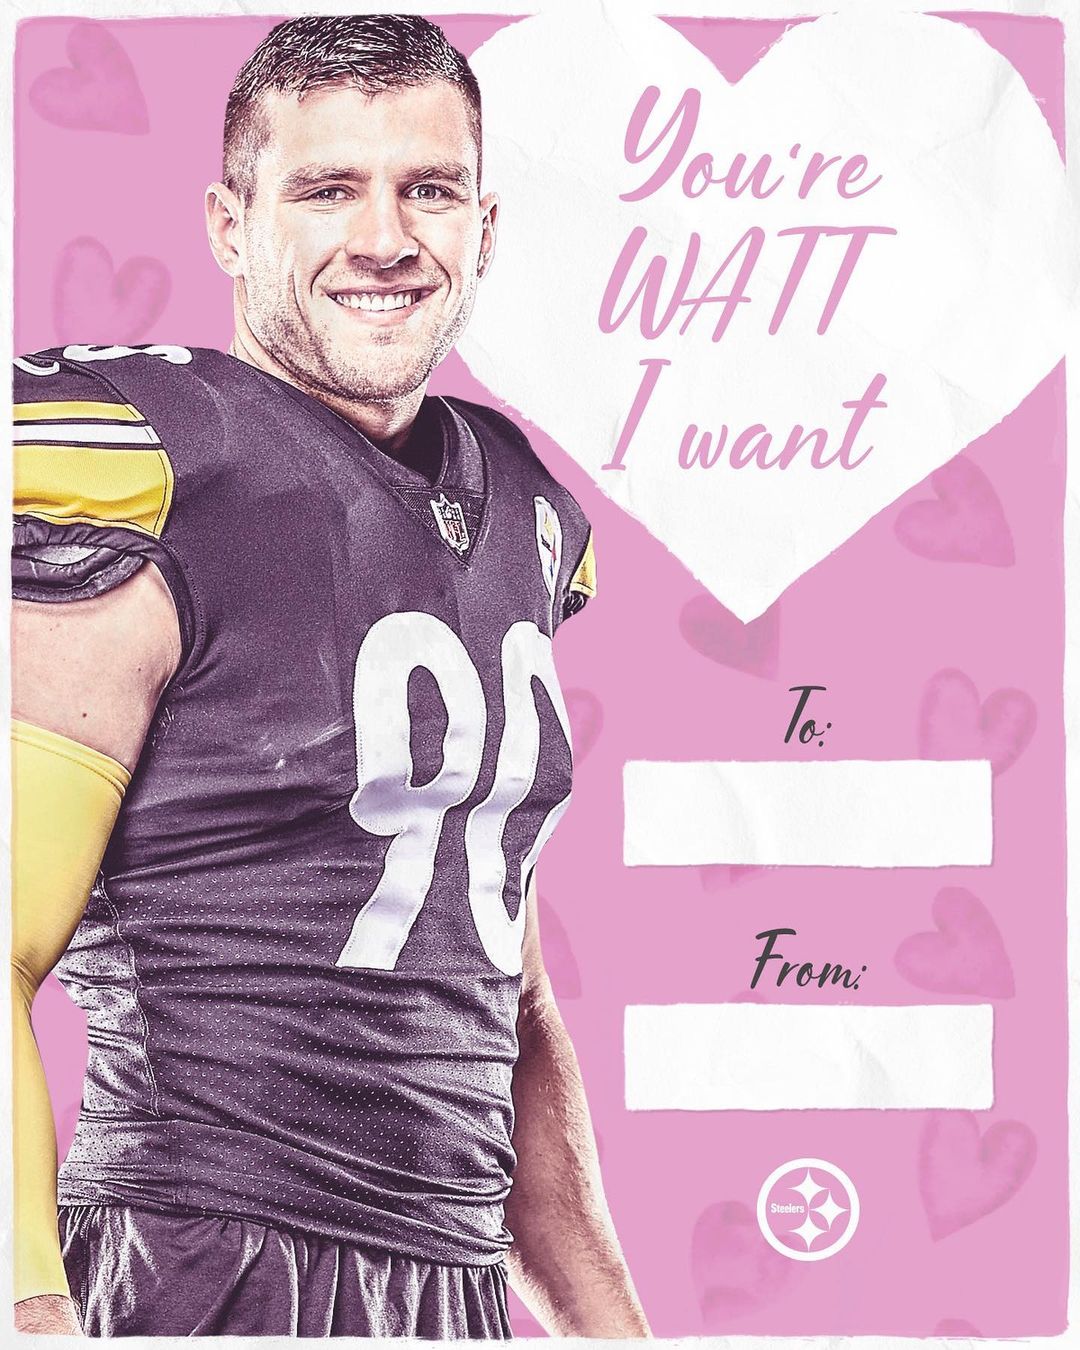 For that special someone  Happy #ValentinesDay...